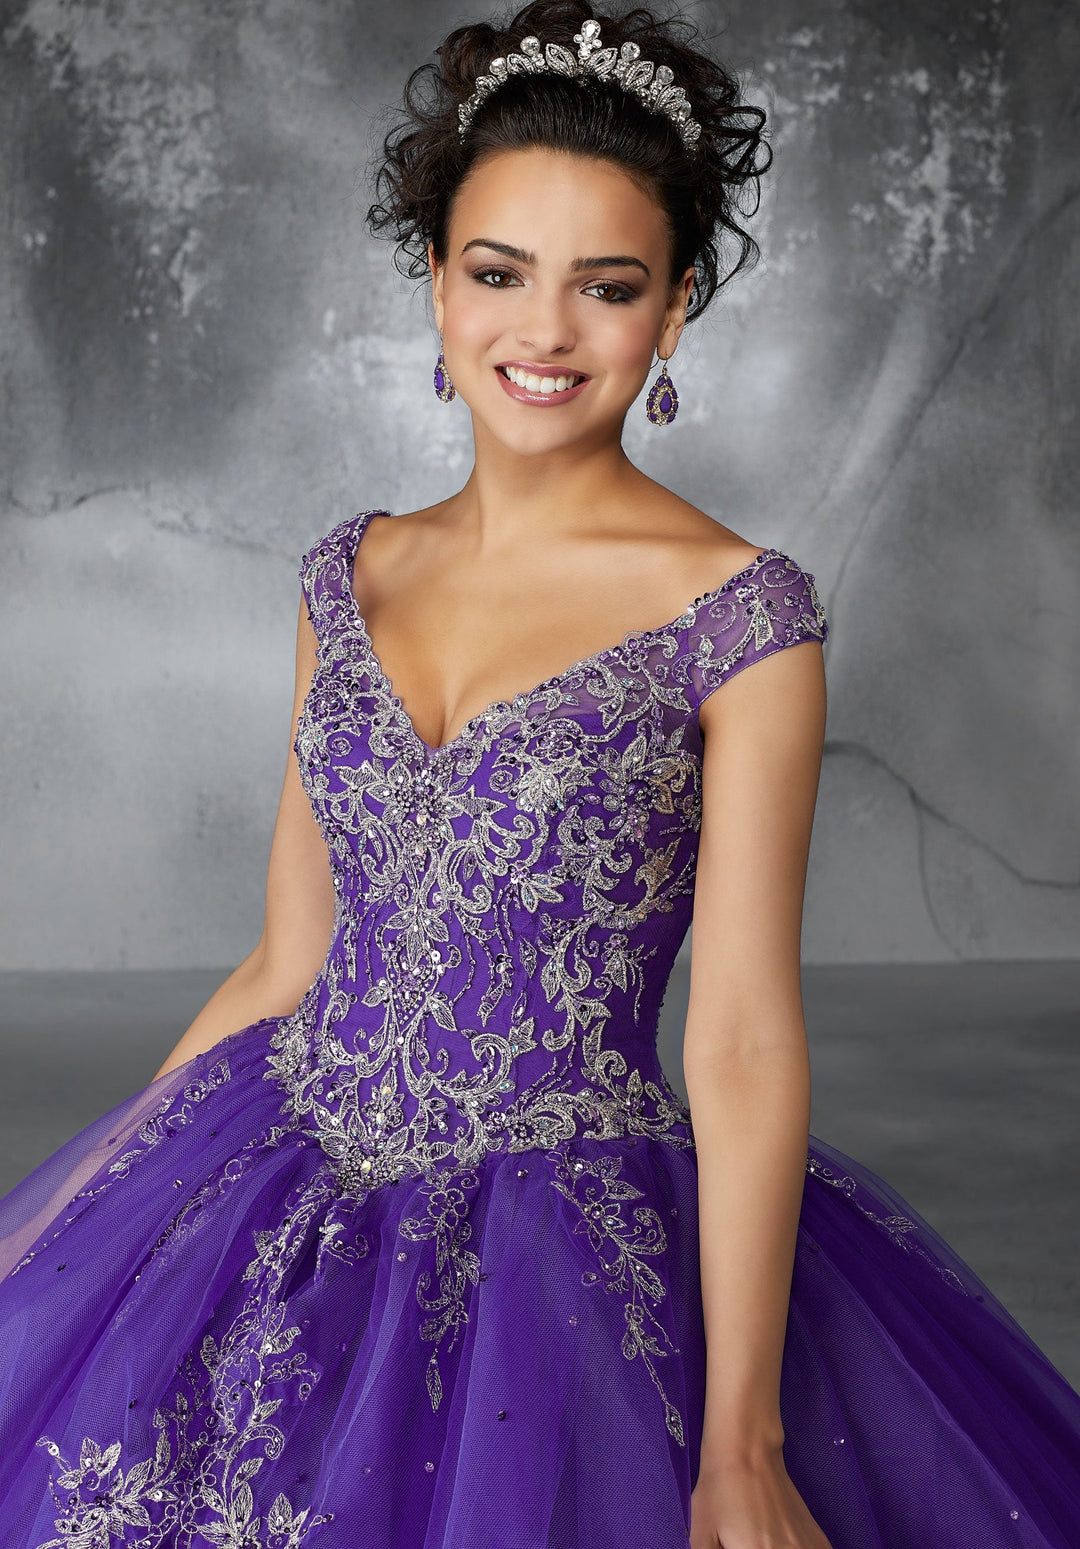 Margaret on a Princess Tulle Ballgown - MoriLee #60054